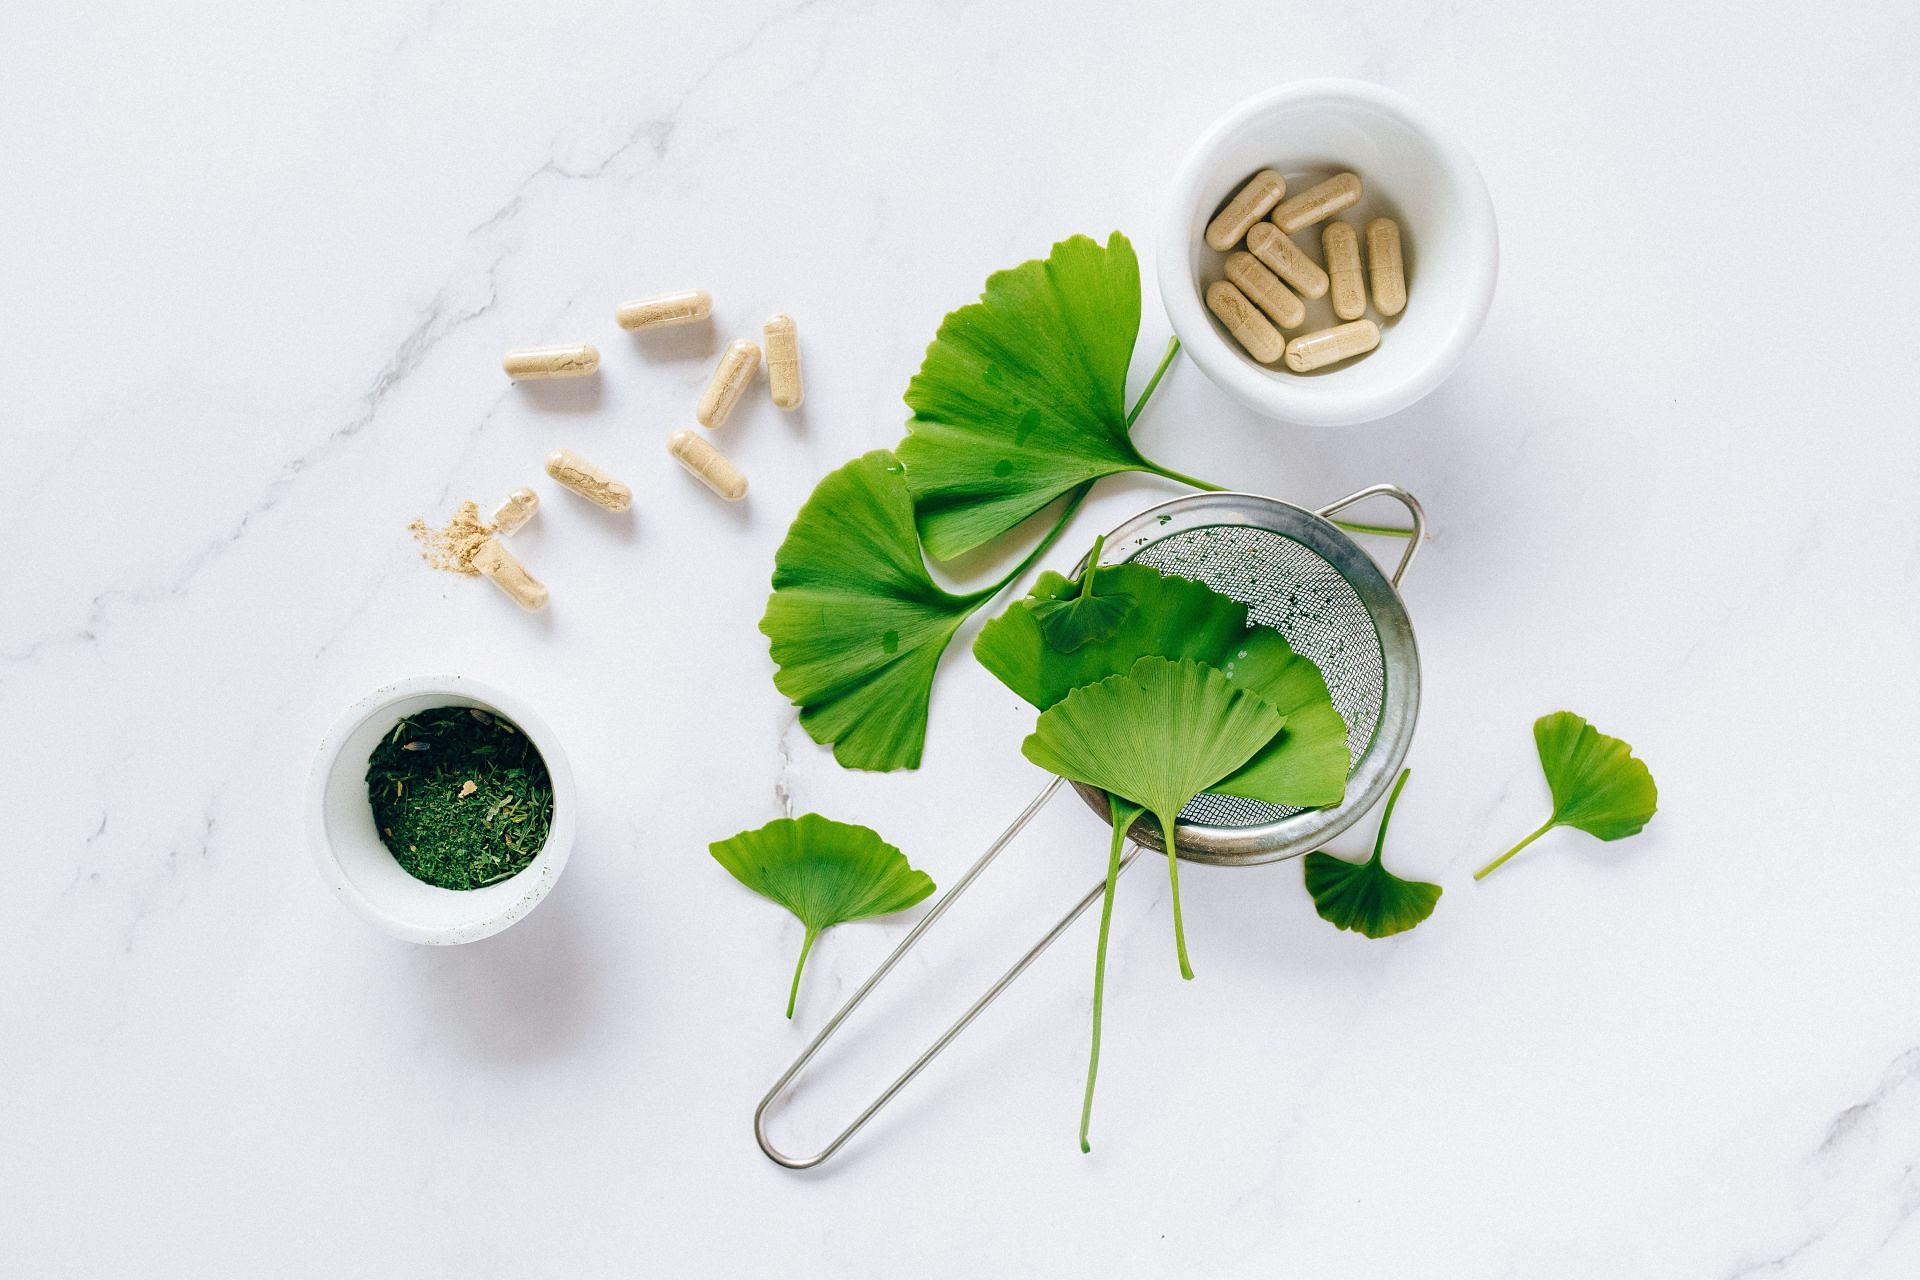 dietary supplements might assist in supplying your body with the necessary nutrients. (Image via Pexels/ Nataliya Vaitkevich)